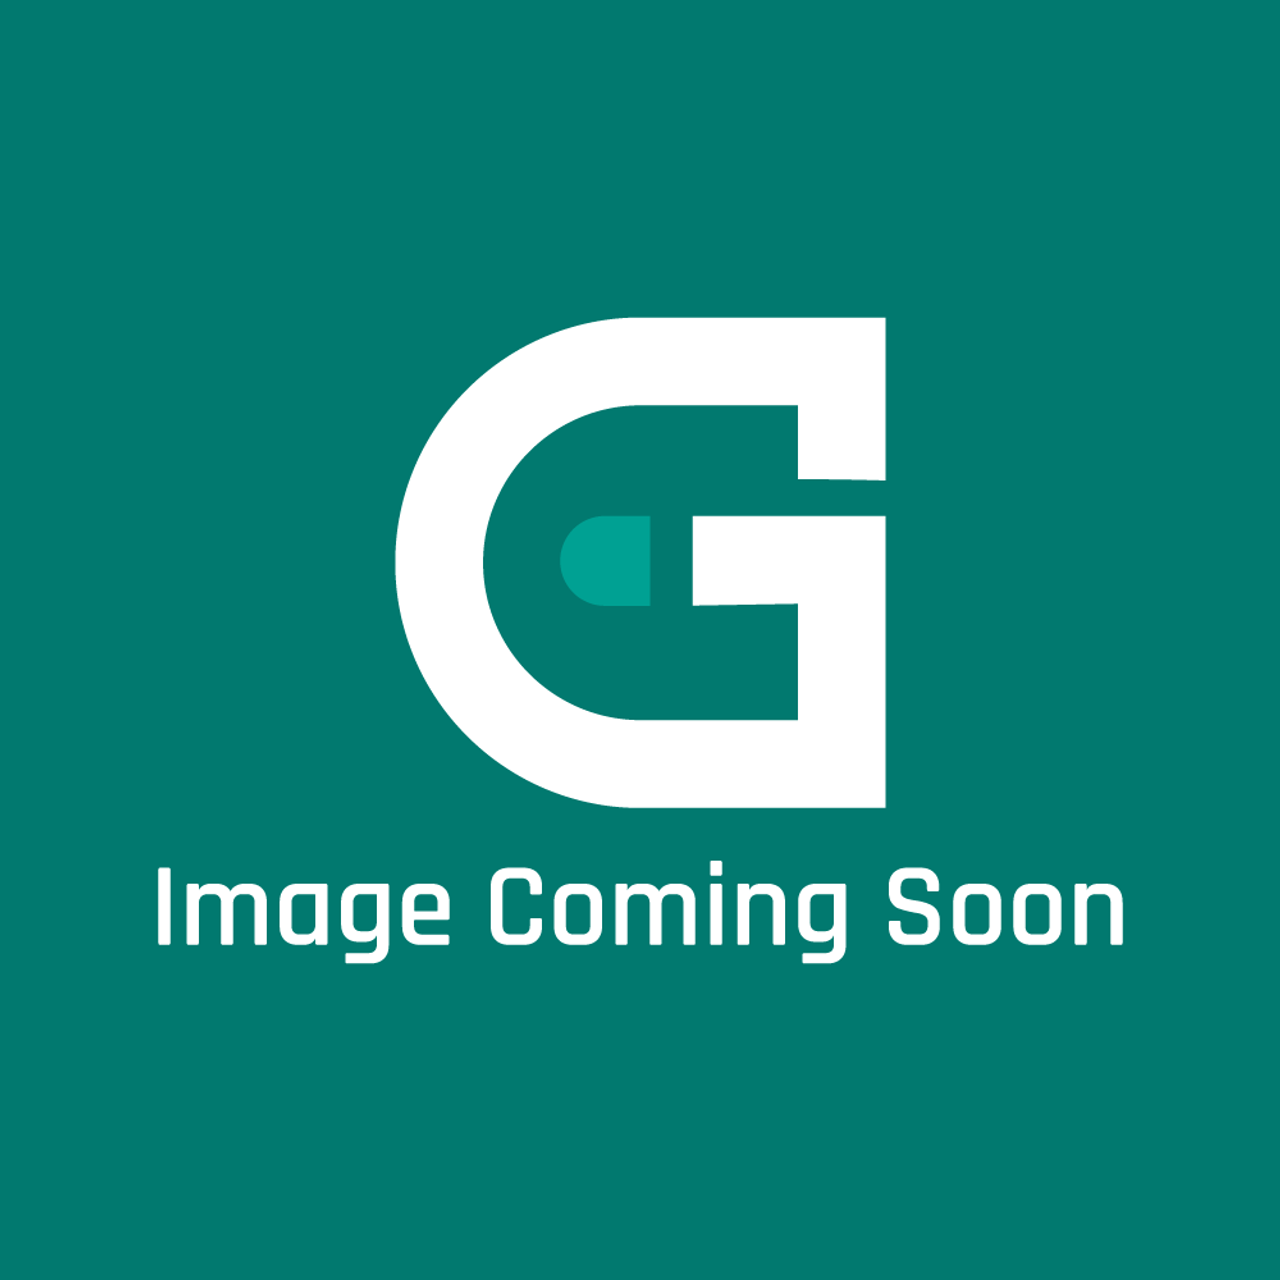 Frigidaire - Electrolux 5304517439 - S/A PUR-COMP. & GRO - Image Coming Soon!